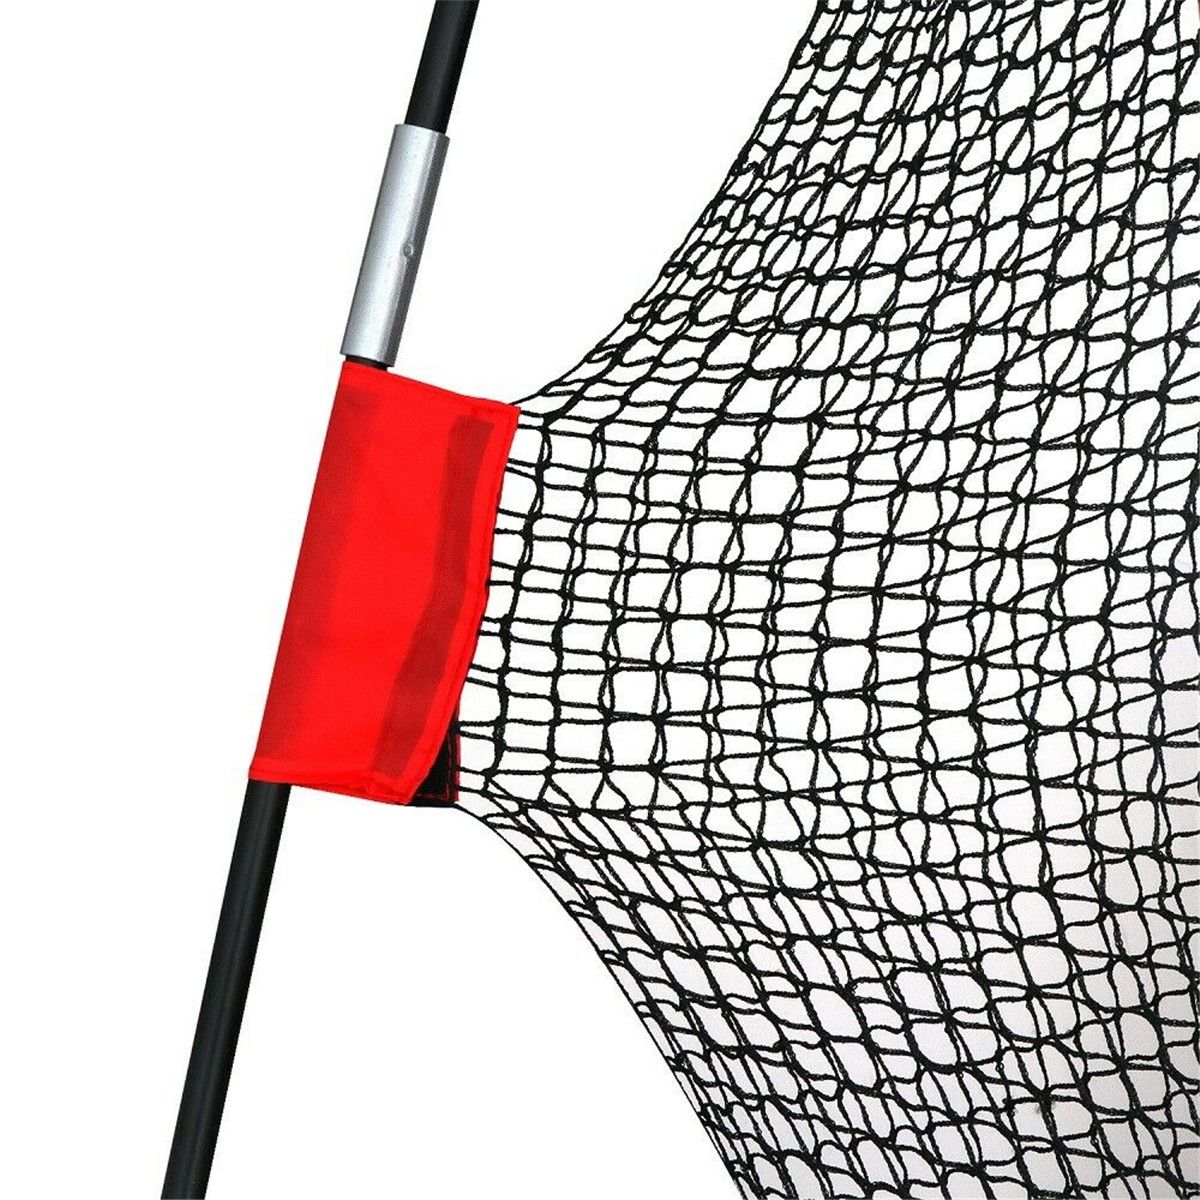 10-x-7FT-Foldable-Golf-Hitting-Practice-Net-Driving-Training-Aids-Carry-Bag-Storage-Net-1615904